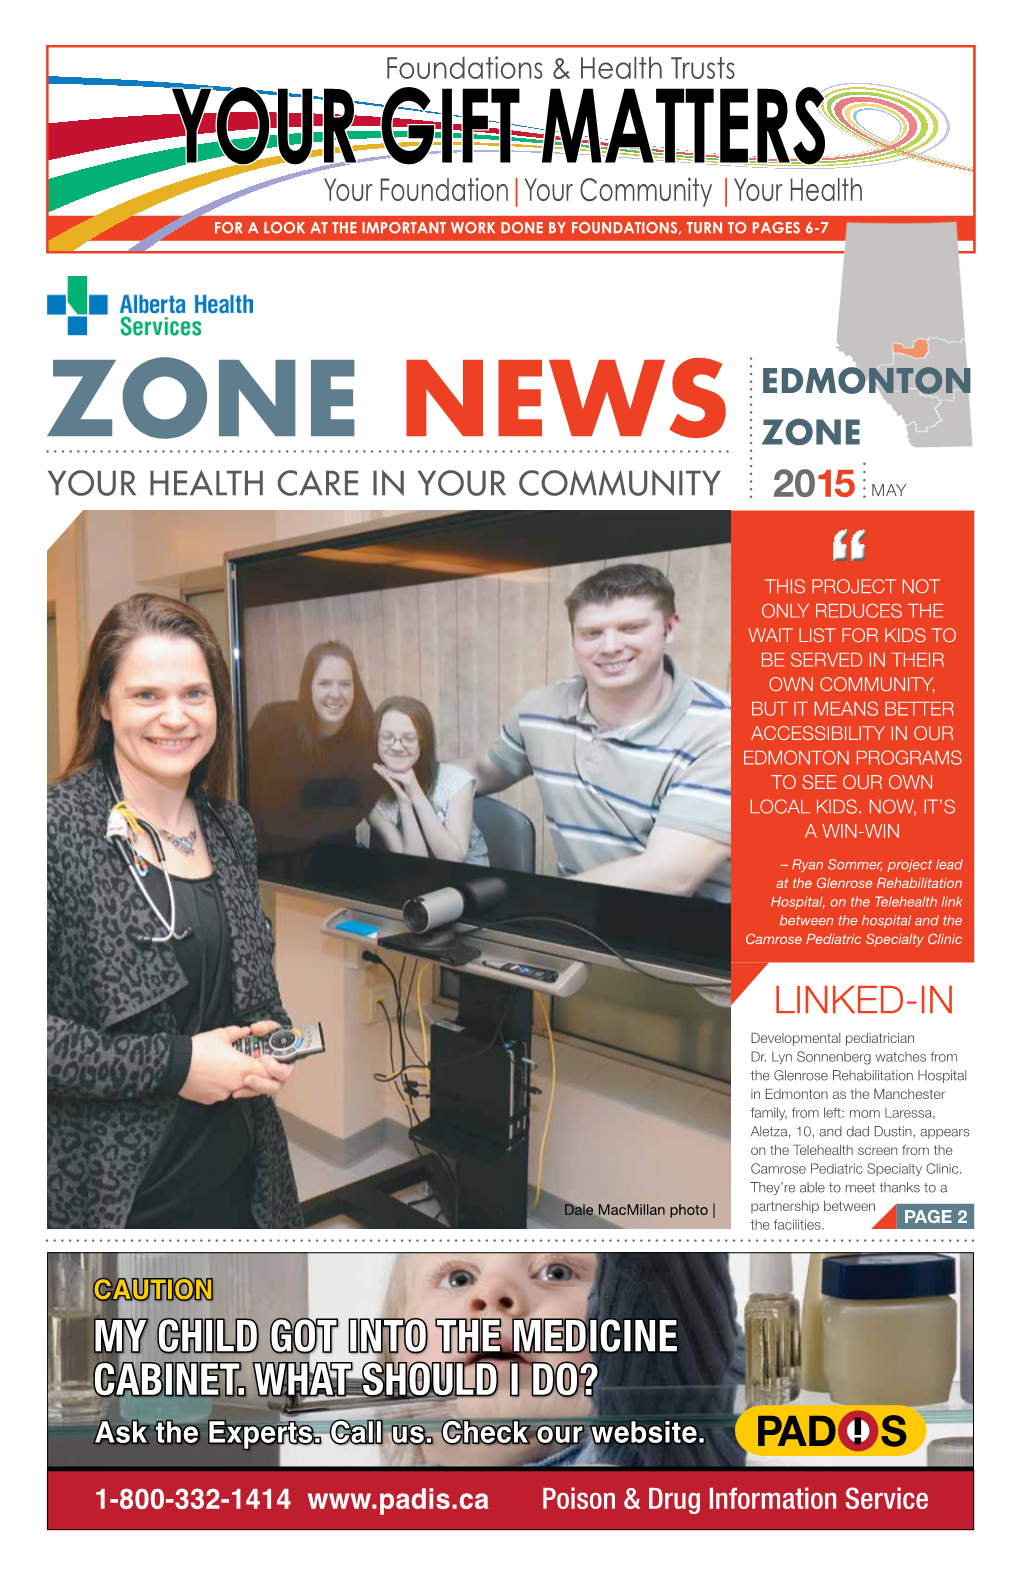 Edmonton Zone NEWS Zone Your Health Care in Your Community 2015 MAY